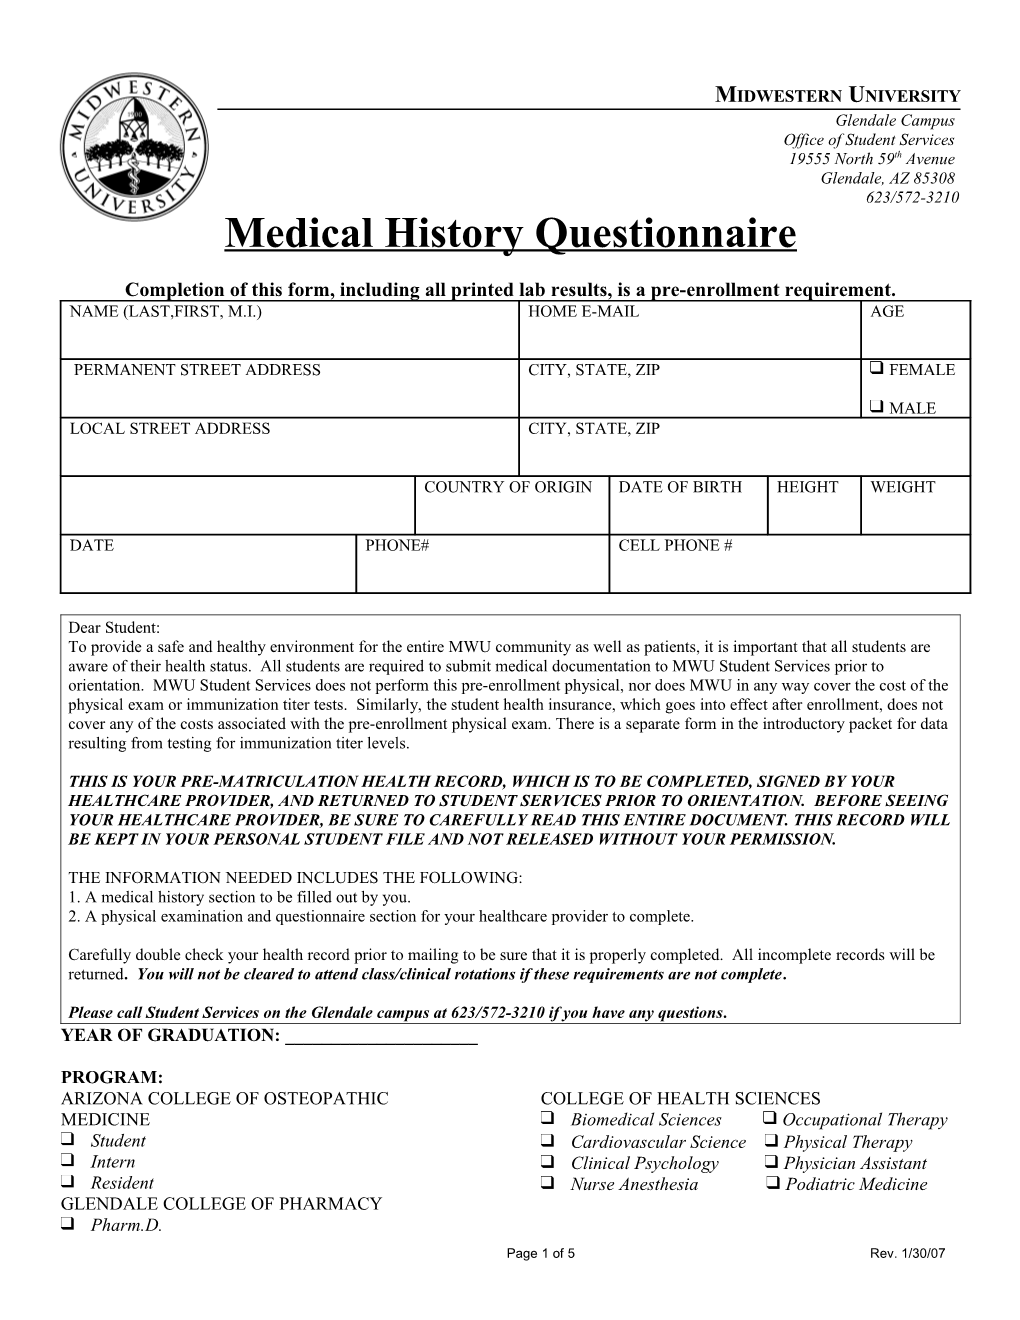 Completion of This Form, Including All Printed Lab Results, Is a Pre-Enrollment Requirement